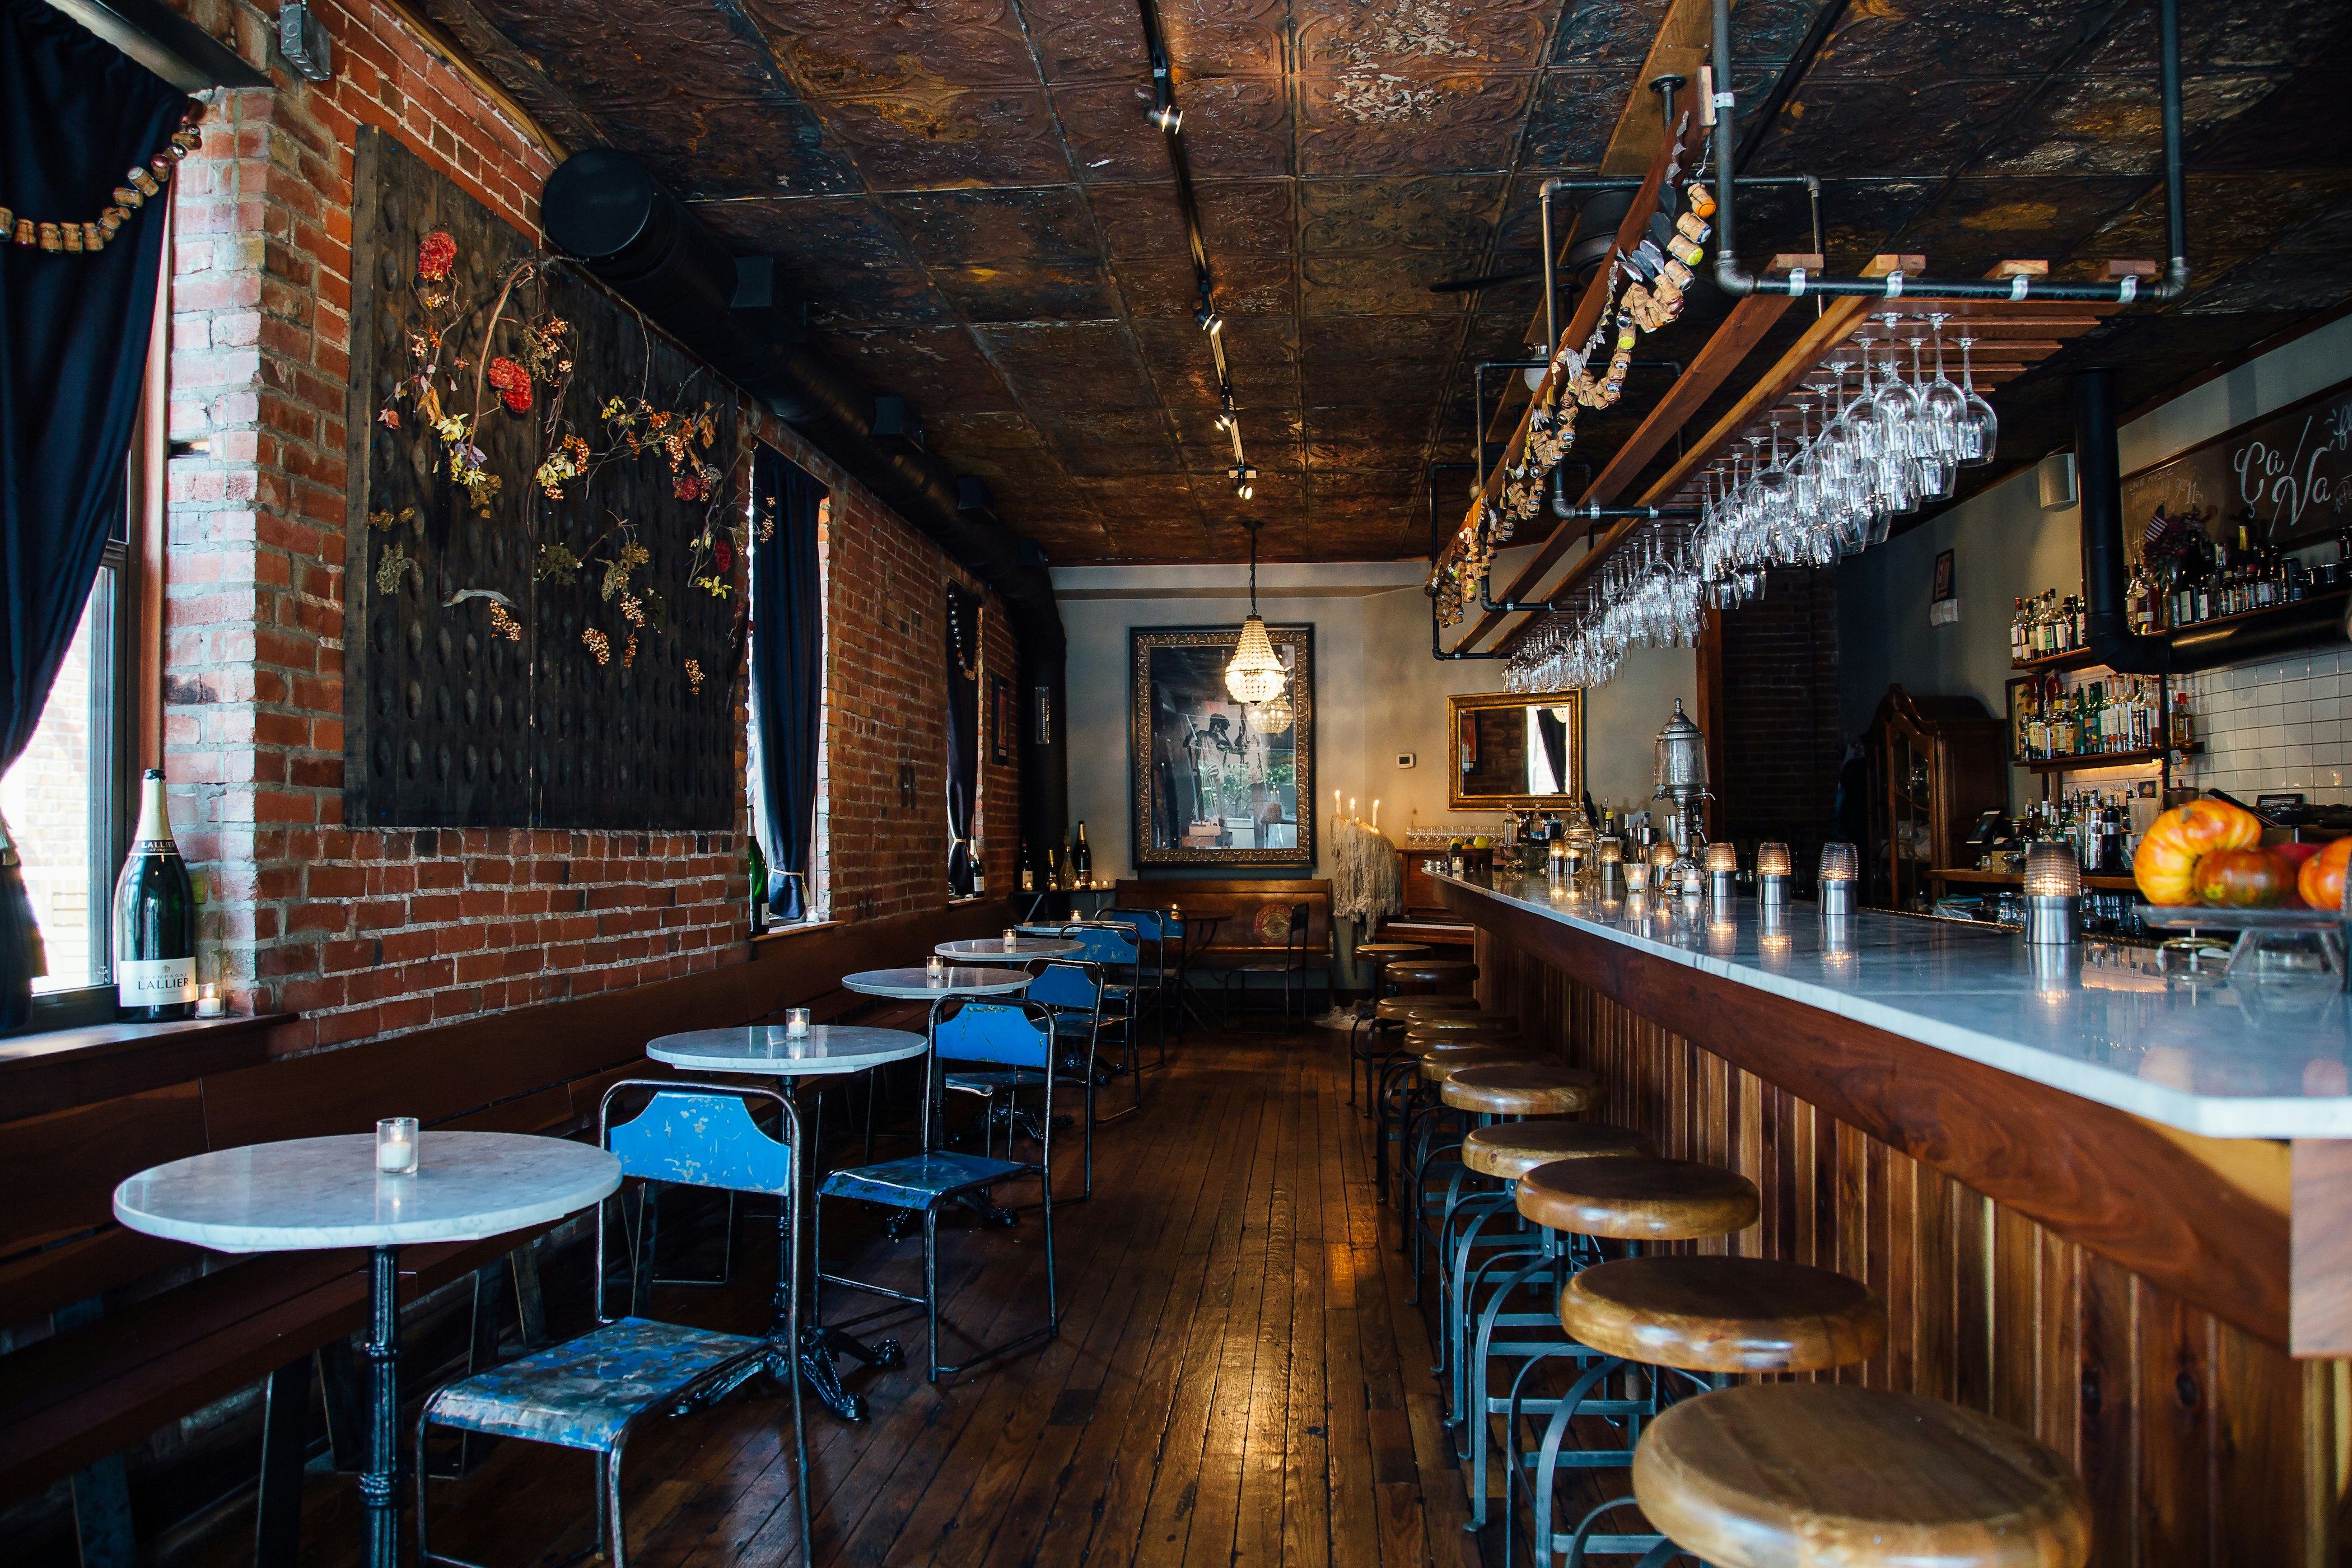 The warm, dark interior of ça va champagne bar in Kansas City is made up of tin ceiling panels with a rich bronze patina, worn wide-plank floor boards with a deep finish, a wooden bar with a marble top, garlands of corks in champagne caages, wood and metal industrial stools, and marble and iron cafe tables. Dark floral art hangs on the walls and simple crystal chandeliers and candle votives glow. In the far background, a pedestal candelabra is coated in hundreds of candles worth of melted wax.